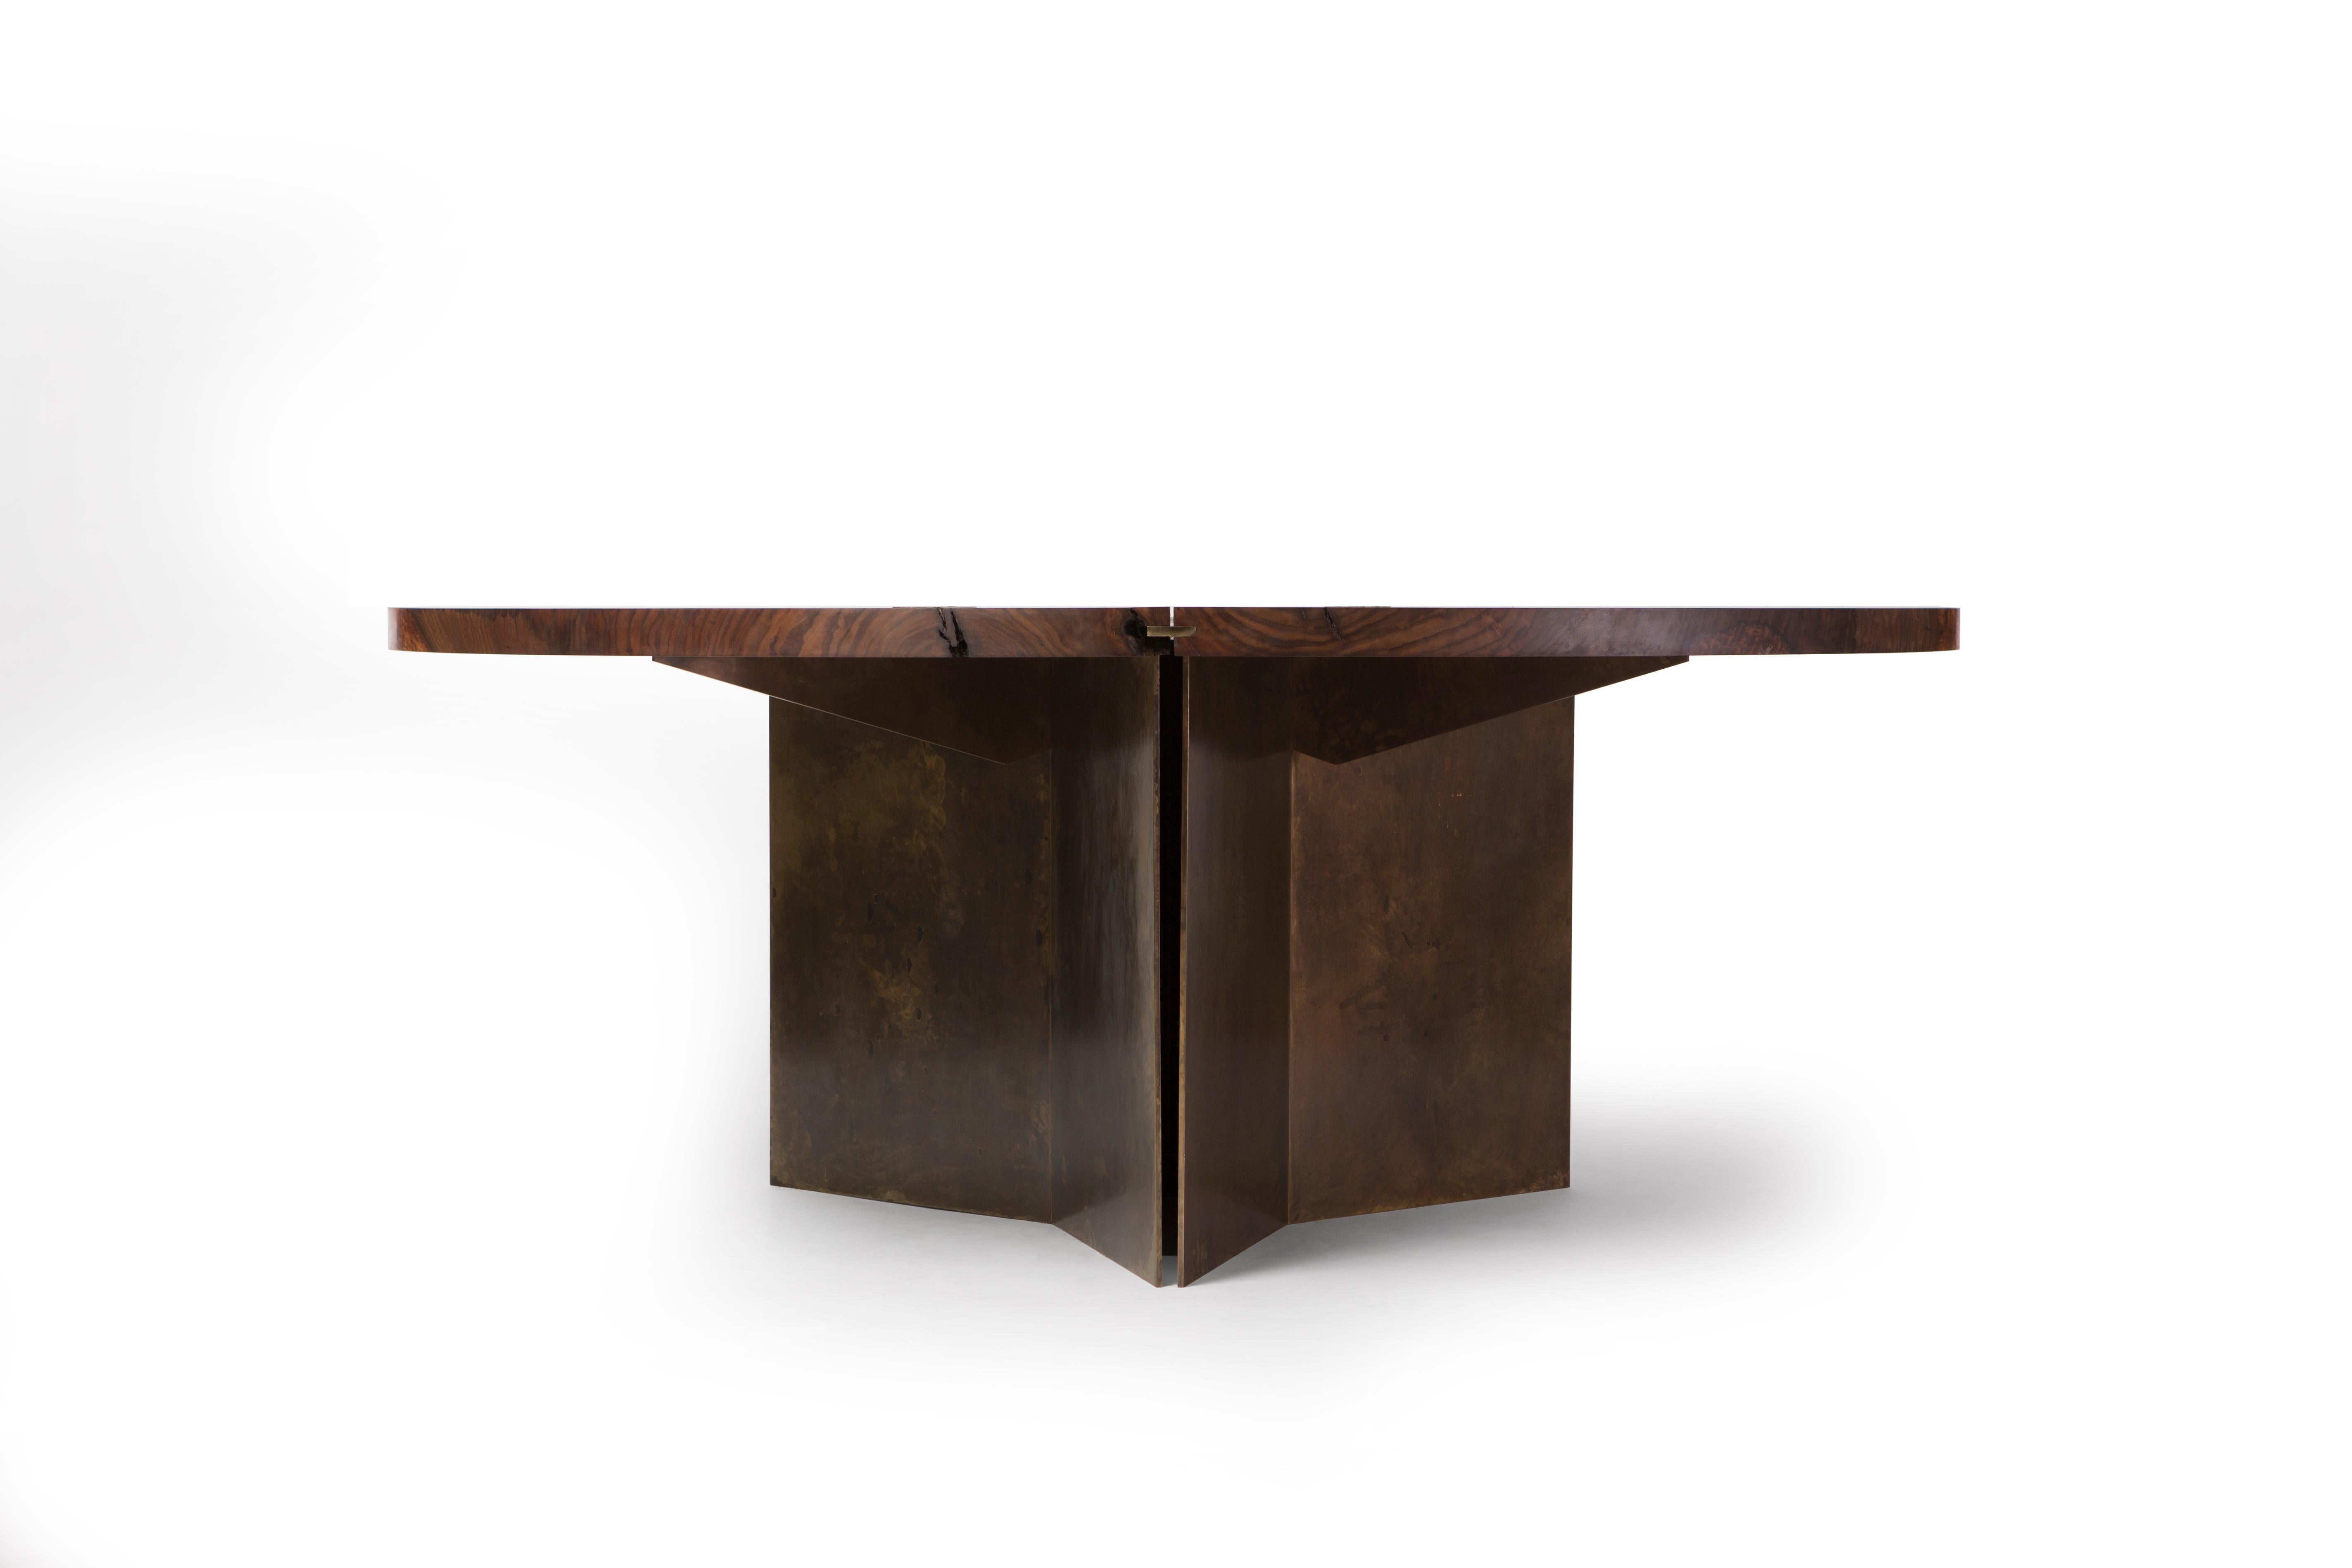 Available in single slab diameters of over six feet, the Harvest dining table by Taylor Donsker creates a visual anchor for any dining room or dining nook. Handcrafted from a single slab of California Claro Walnut that balances beautiful grain and